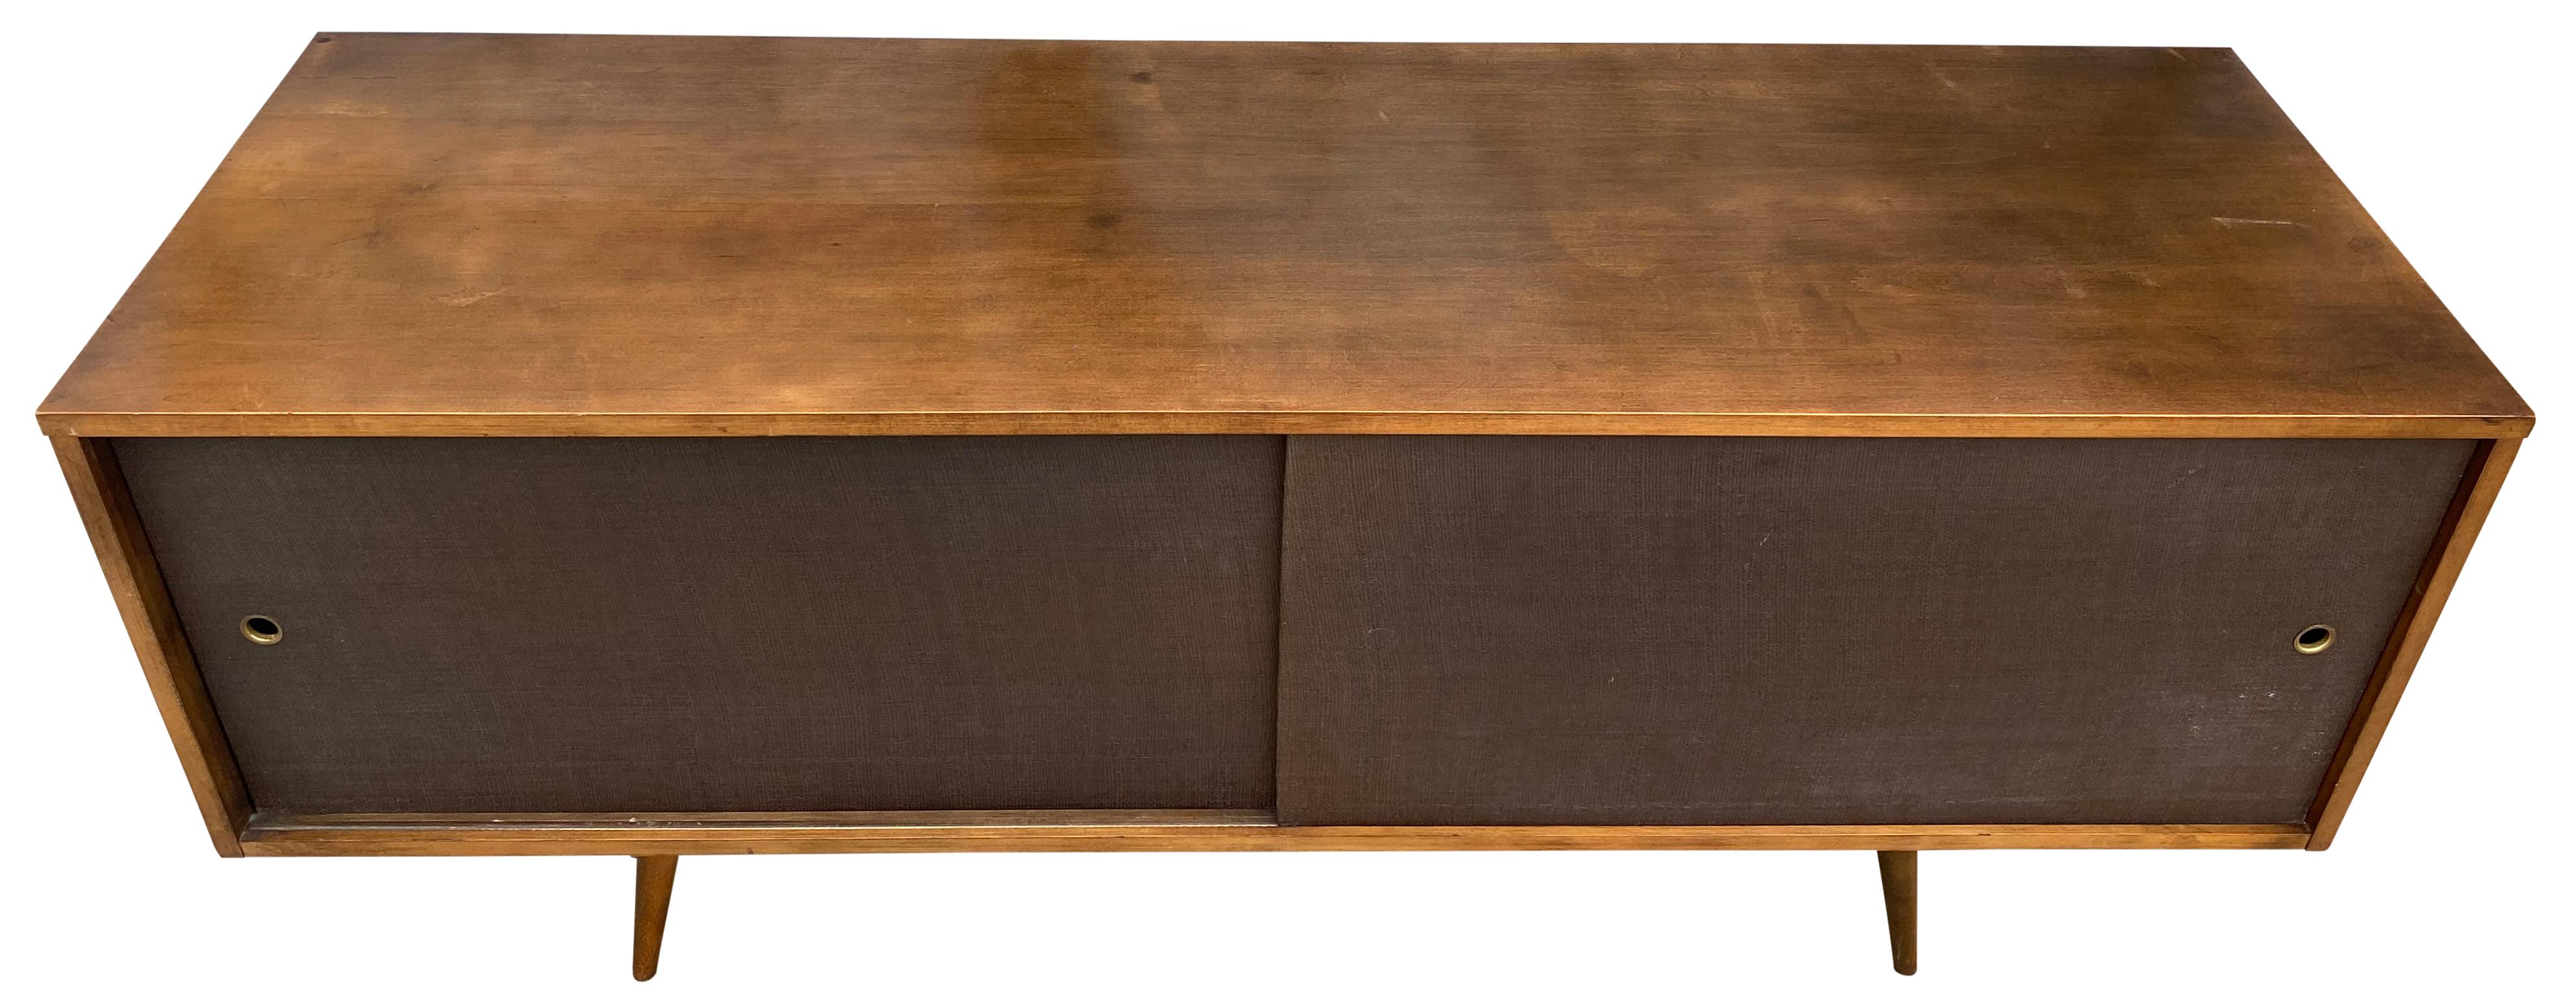 Beautiful midcentury low credenza by Paul McCobb circa 1950 planner group #1513 has 2 adjustable shelves with pins - solid maple construction has a Beautiful Walnut finish. All original brown cloth sliding front doors with brass finger pull sits on